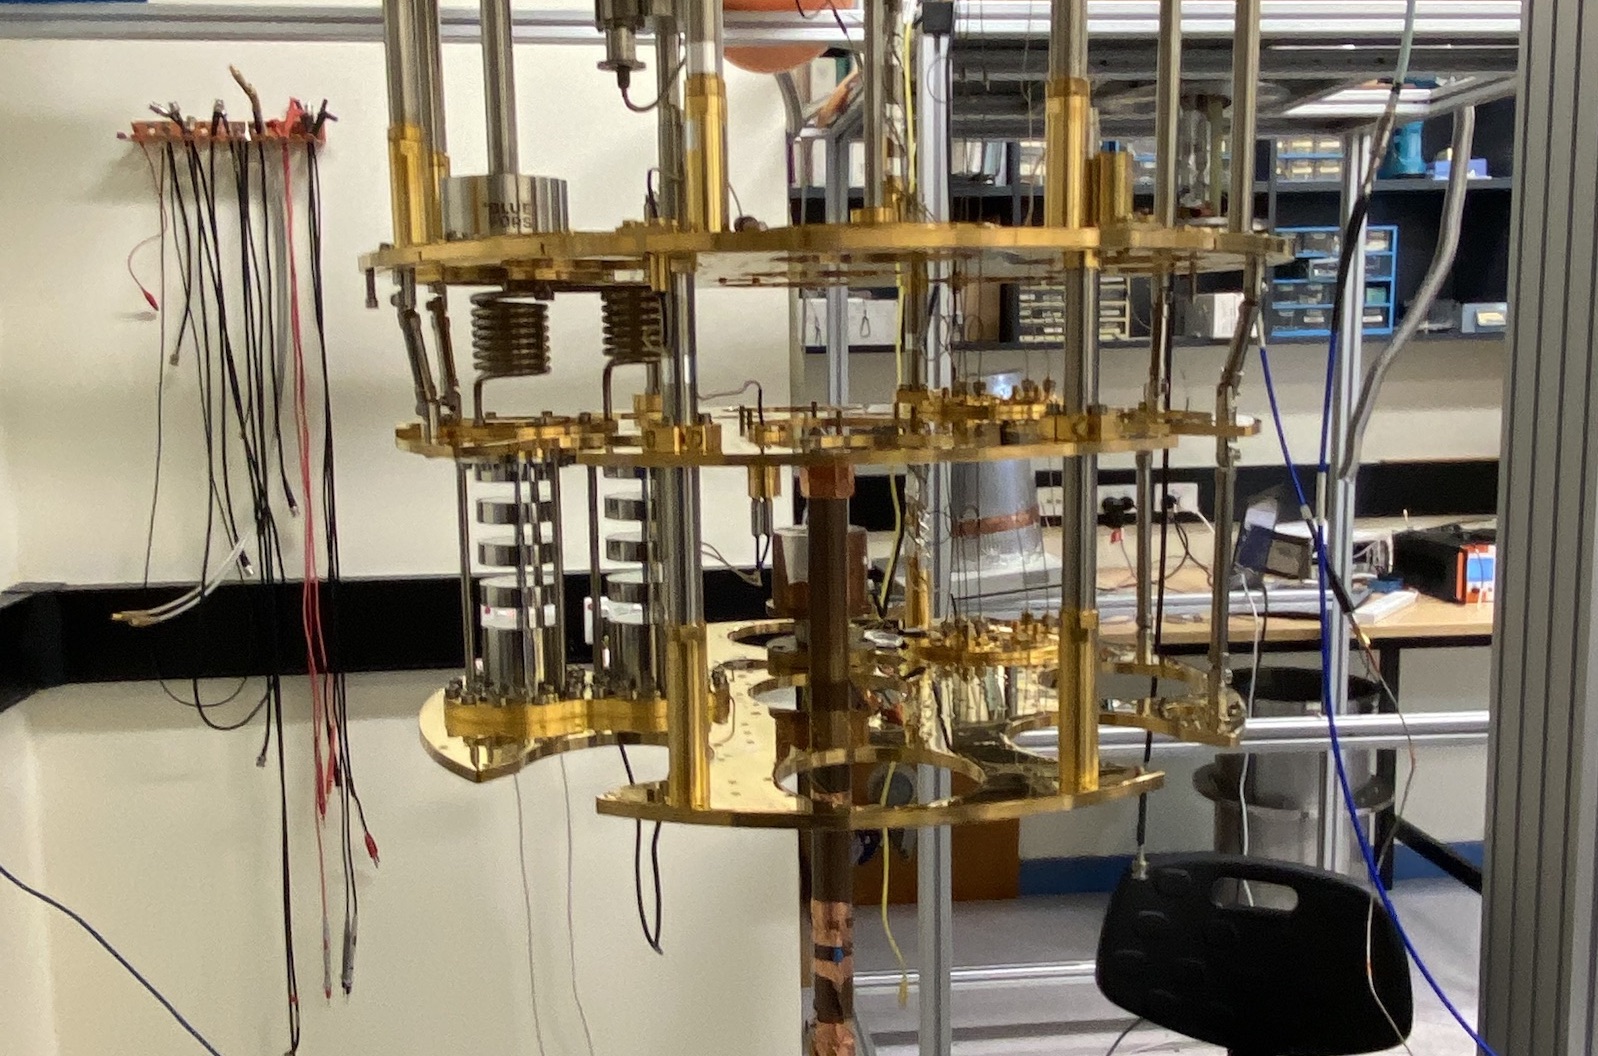 The ORGAN Experiment's main detector. A small copper cylinder called a 'resonant cavity' traps photons generated during dark matter conversion. The cylinder is bolted to a 'dilution refrigerator' which cools the experiment to very low temperatures.